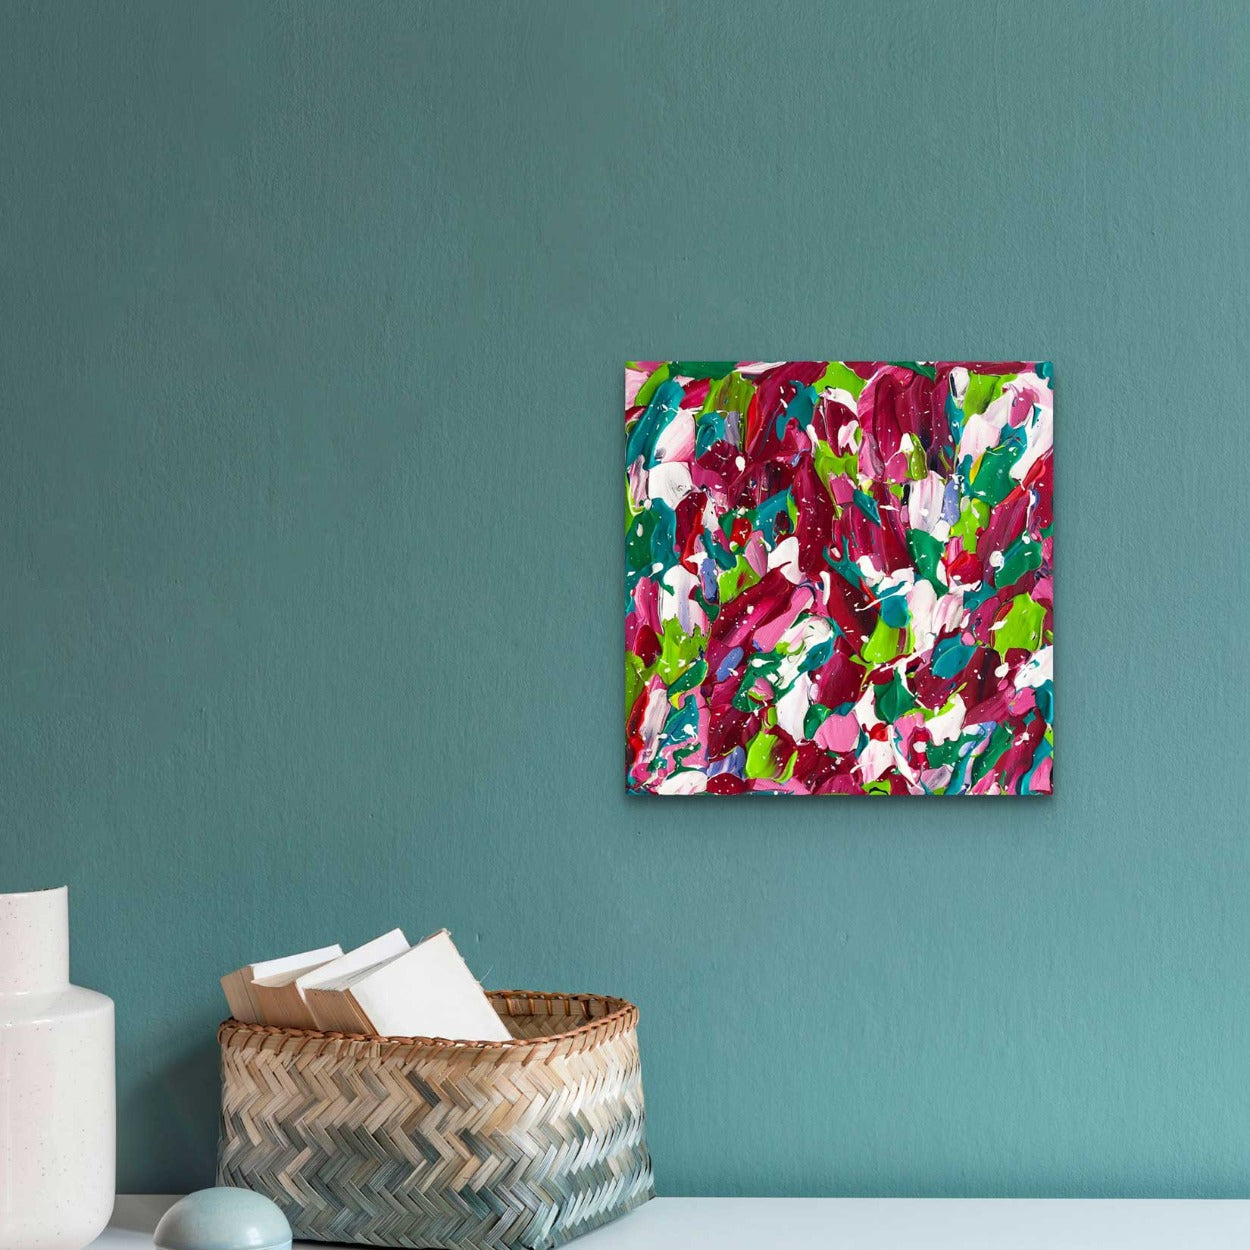 Splash, original textured abstract painting on canvas. Seen hanging in situ against wall with decor. Palette of bold white, greens, reds. Abstract artist, Bridget Bradley